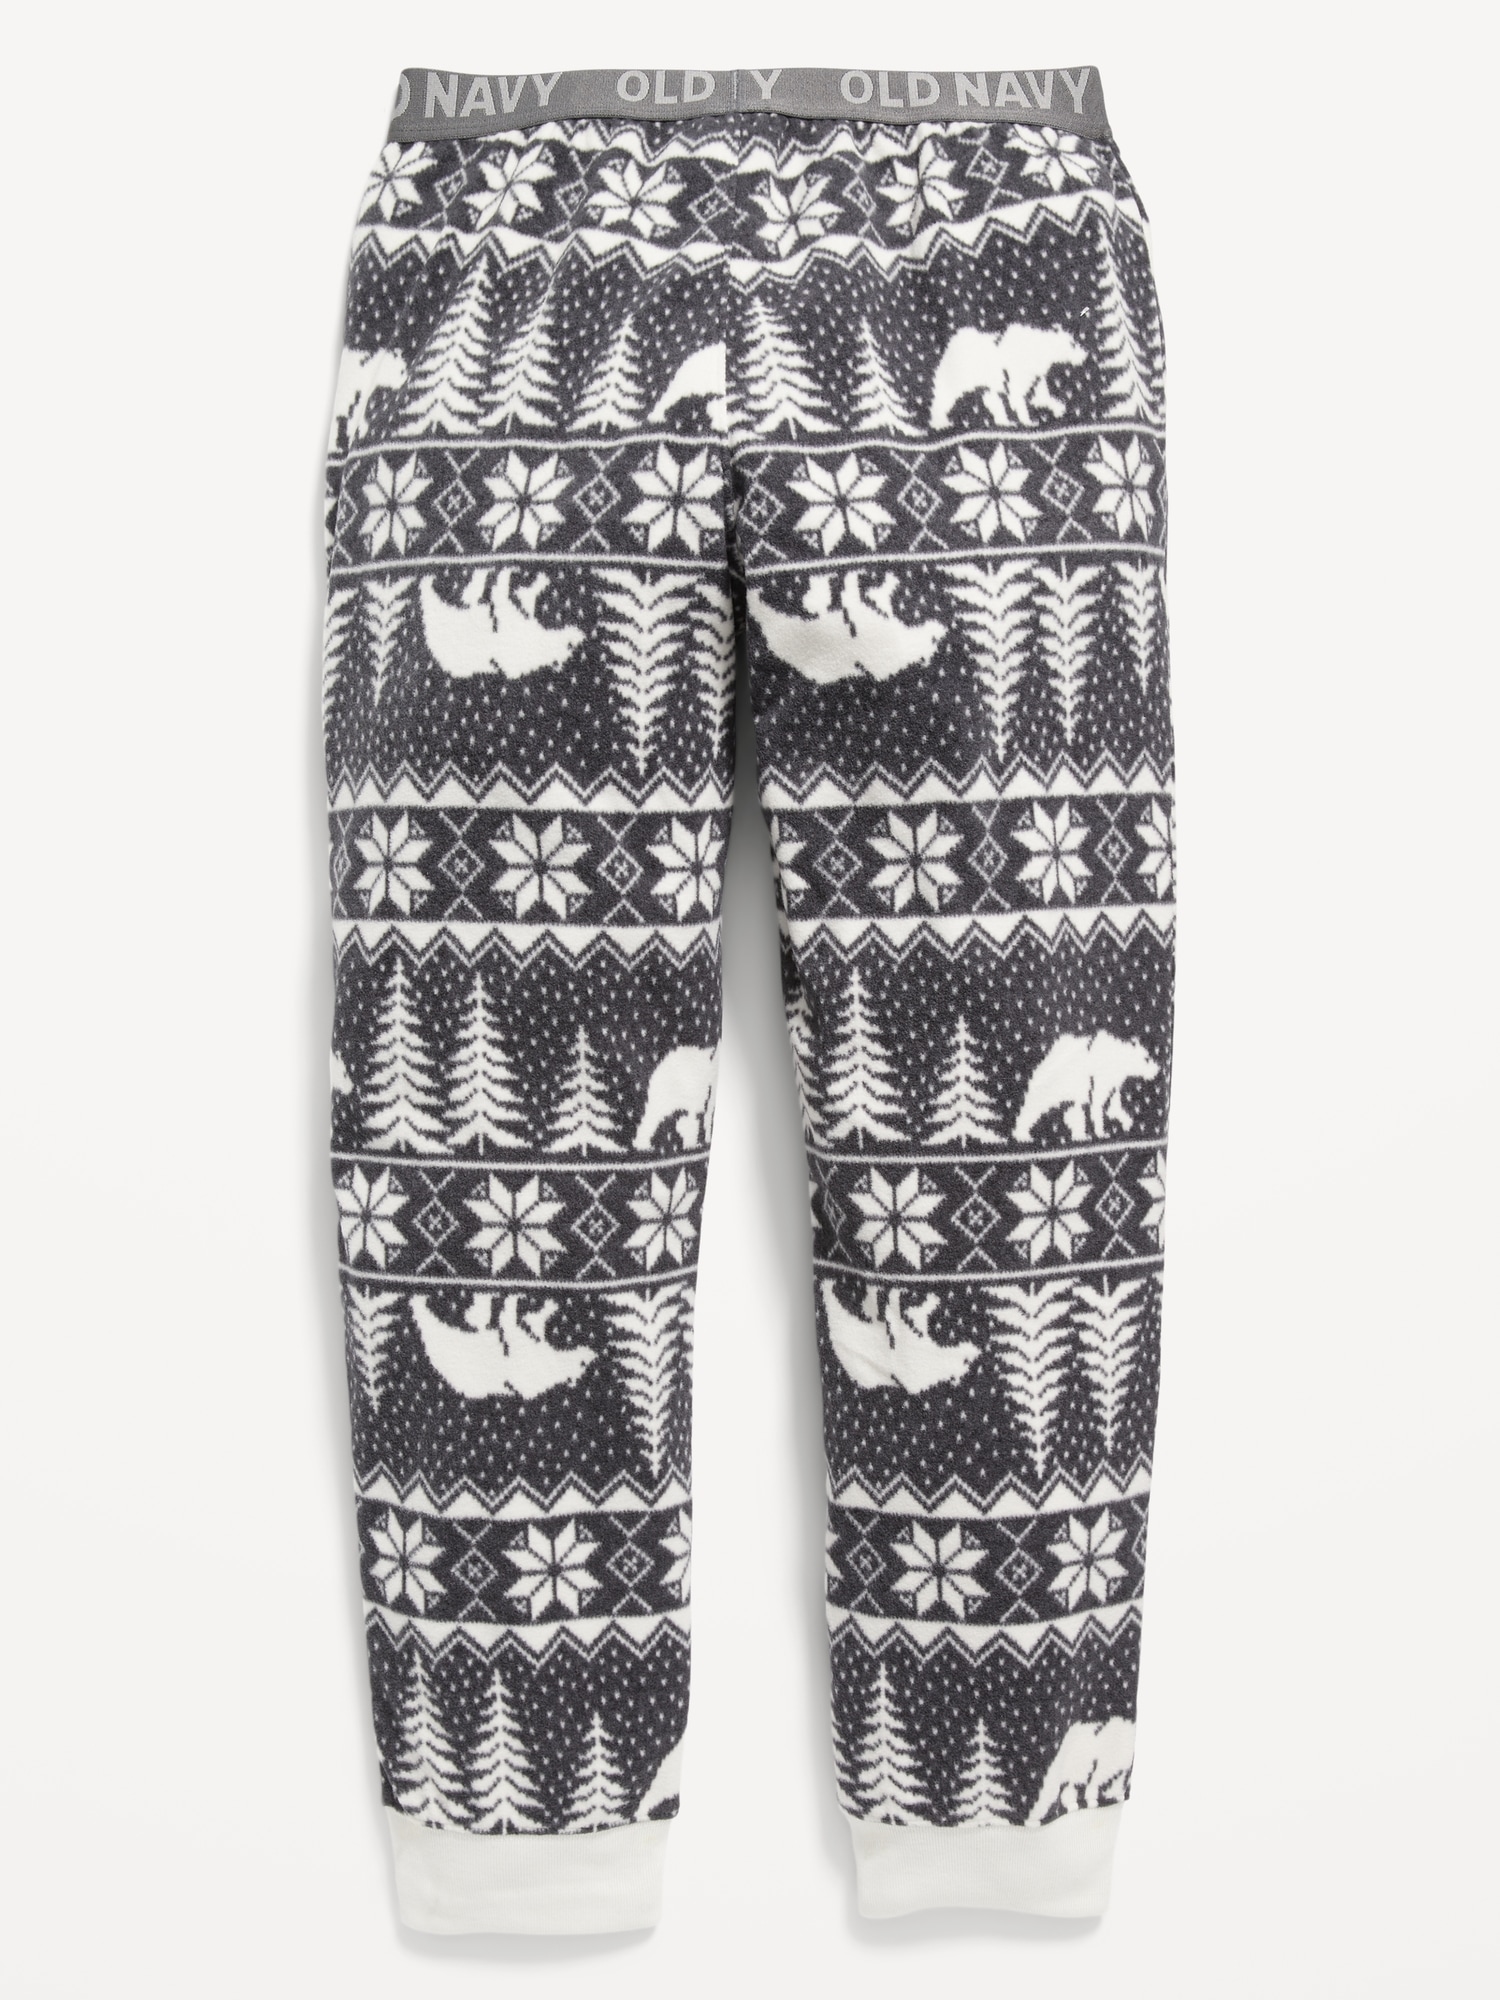 Patterned Microfleece Pajama Jogger Pants for Boys | Old Navy